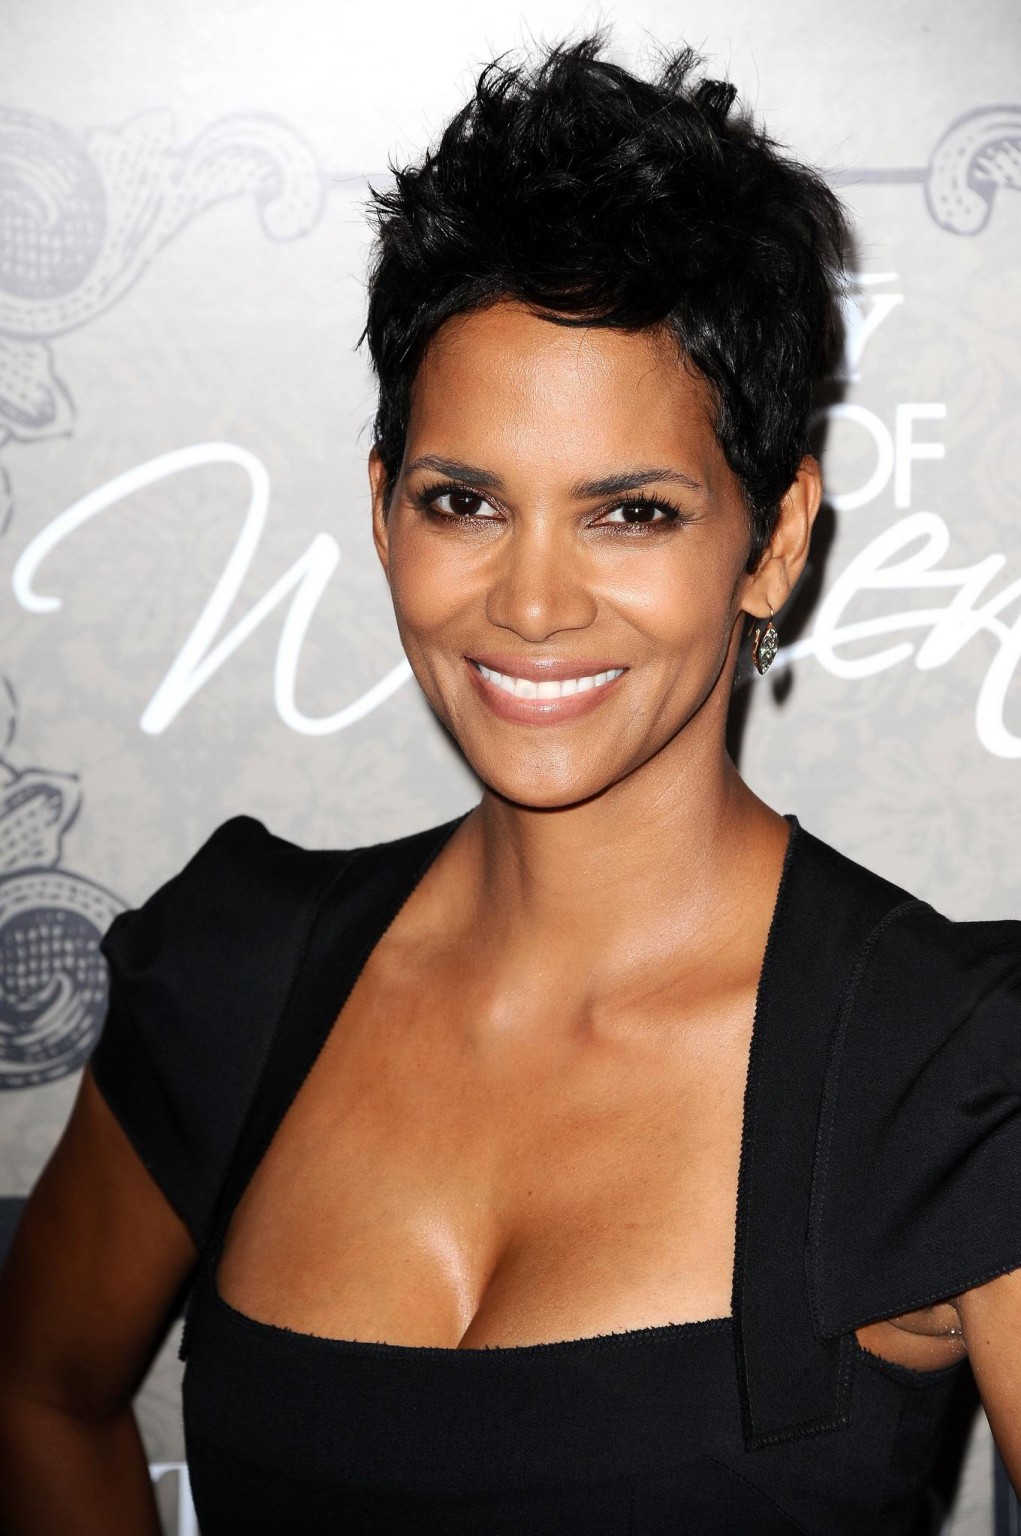 Halle Berry cleavy wearing a black low cut dress at Variety's Power of Women in  #75251165